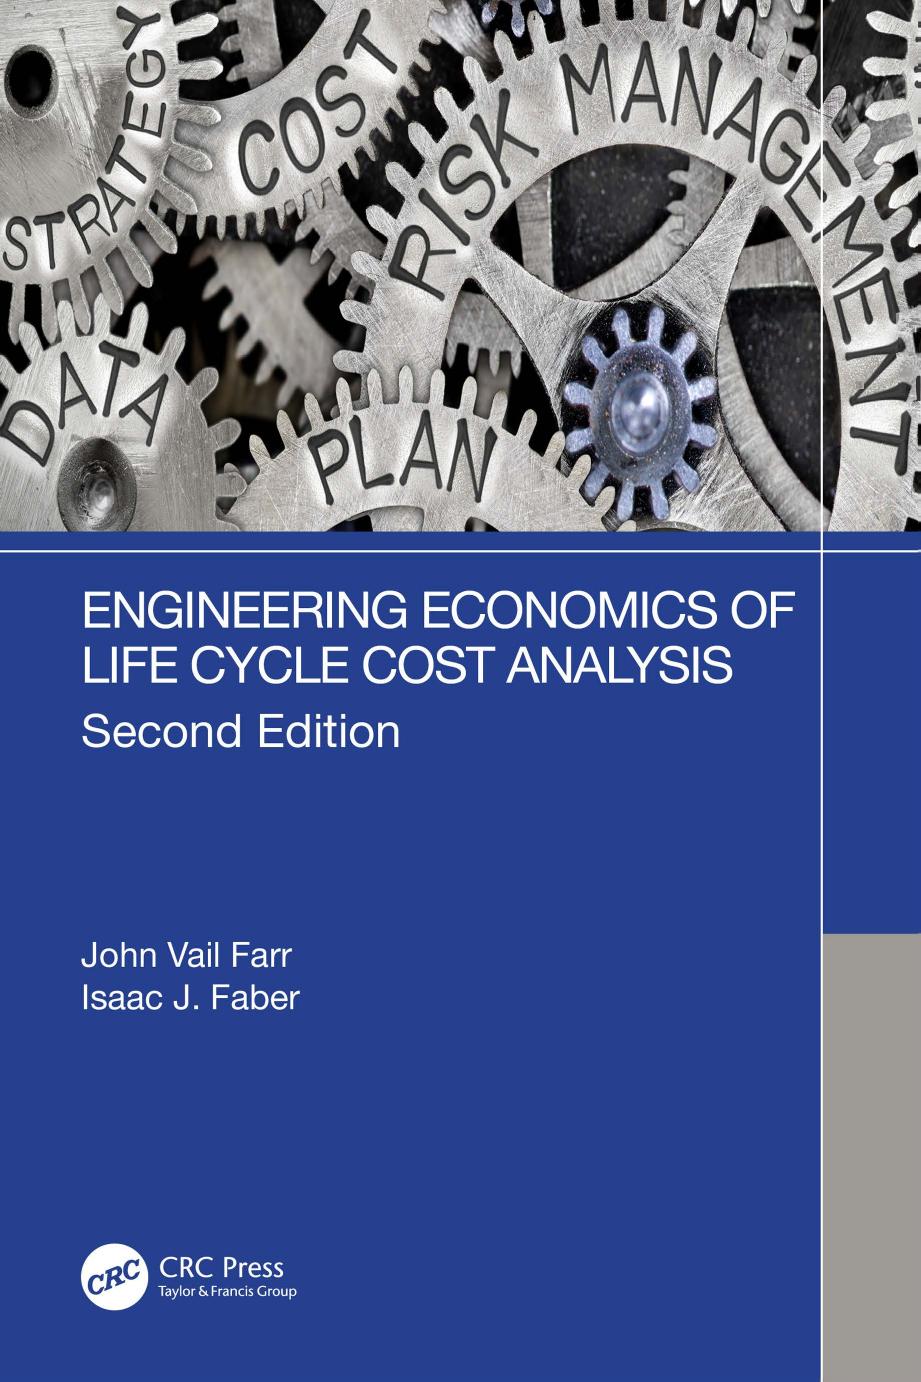 Engineering Economics of Life Cycle Cost Analysis by John Vail Farr Isaac J. Faber